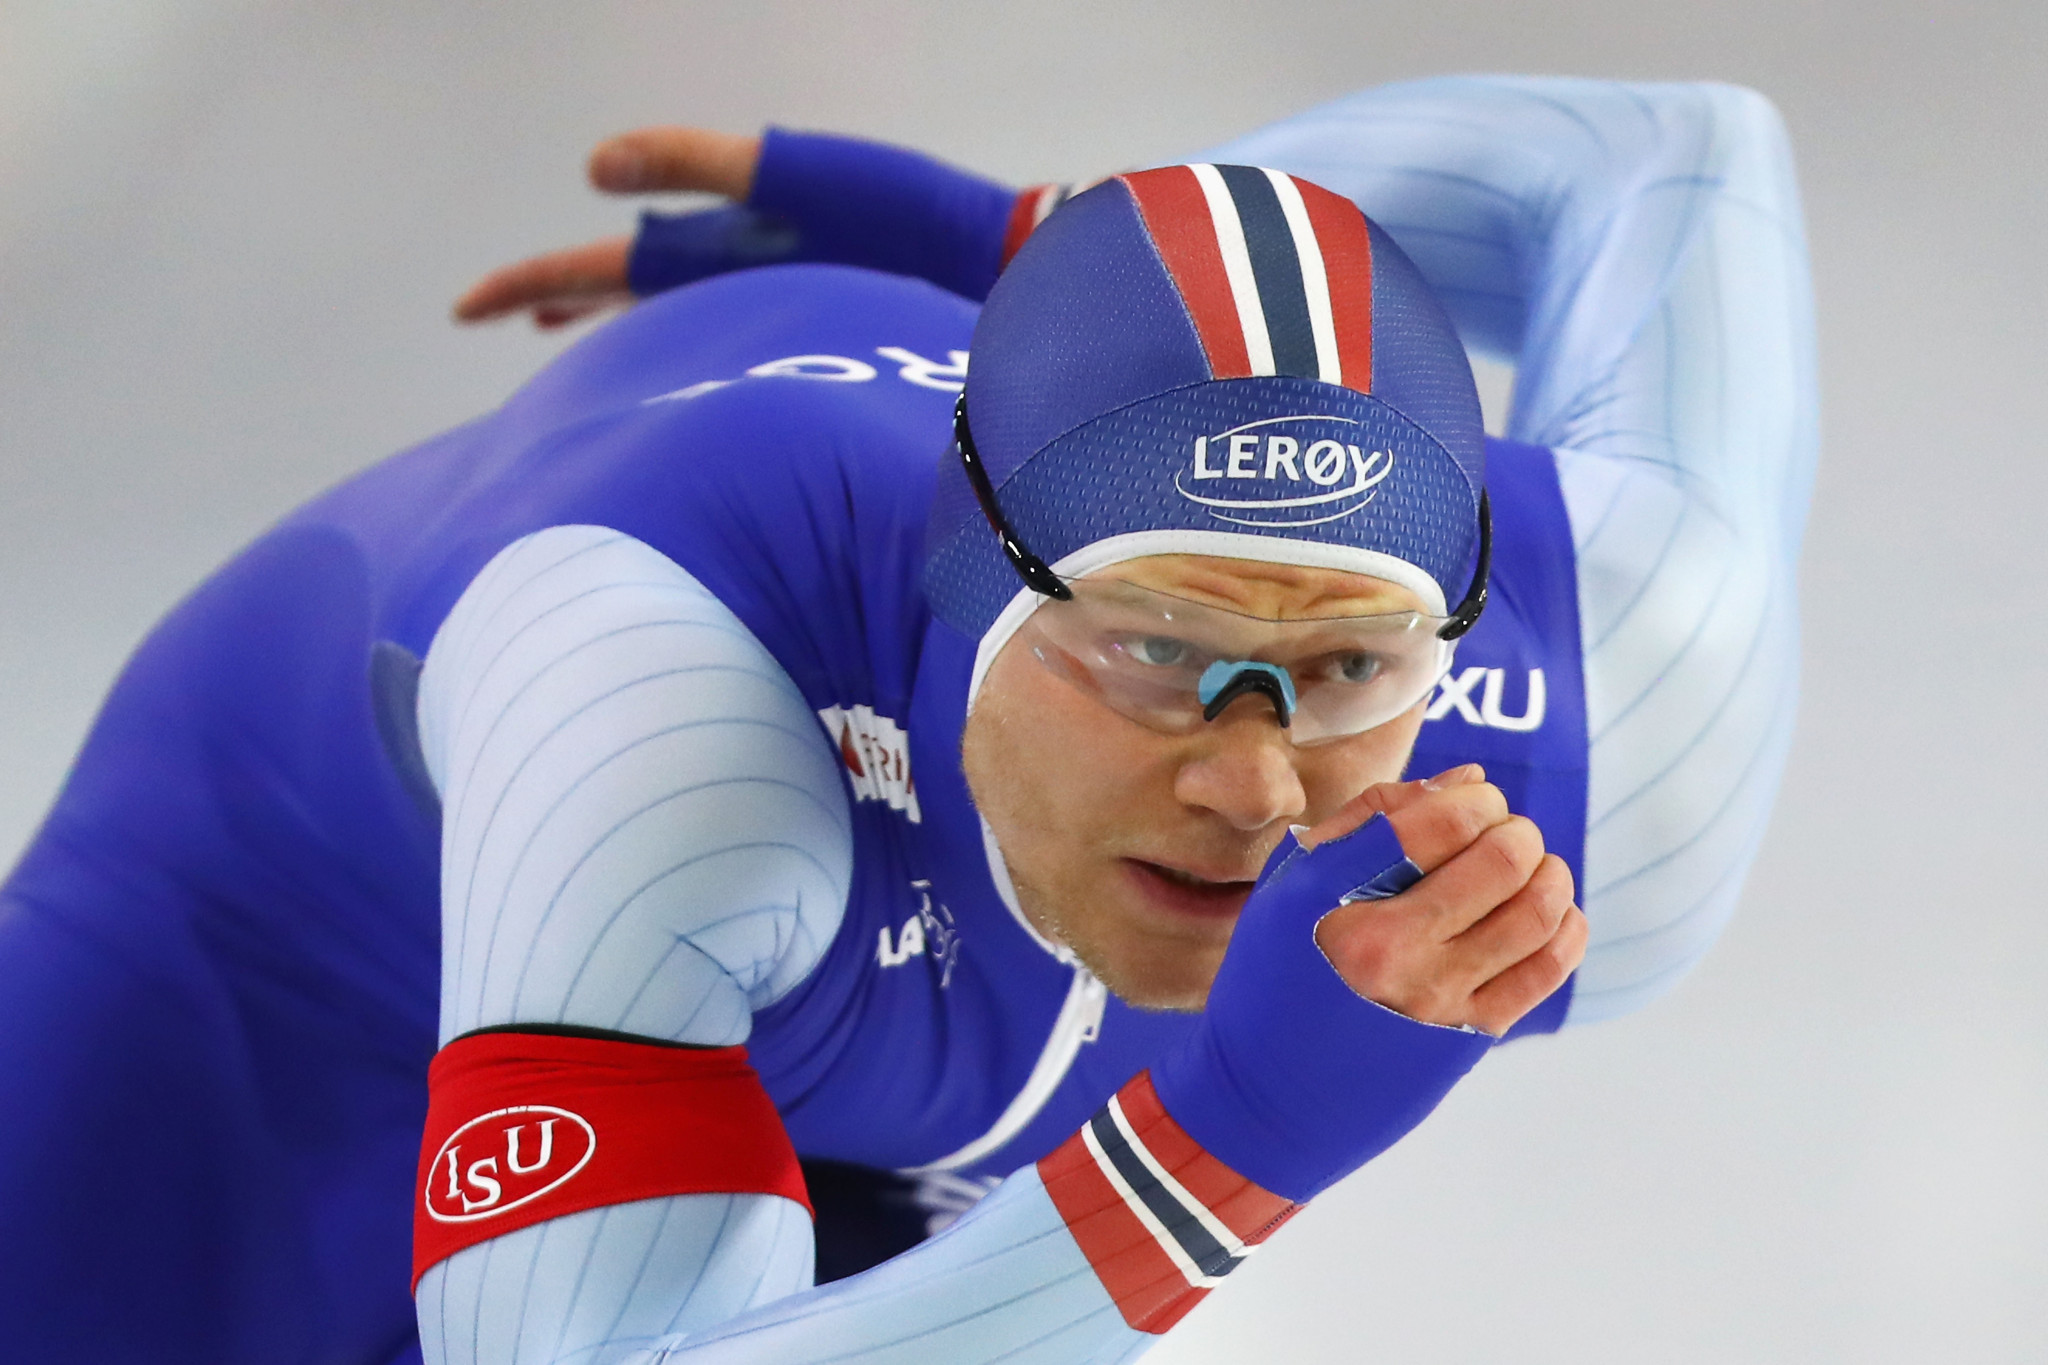 Olympic gold medallist Lorentzen aiming for return to form after difficult season